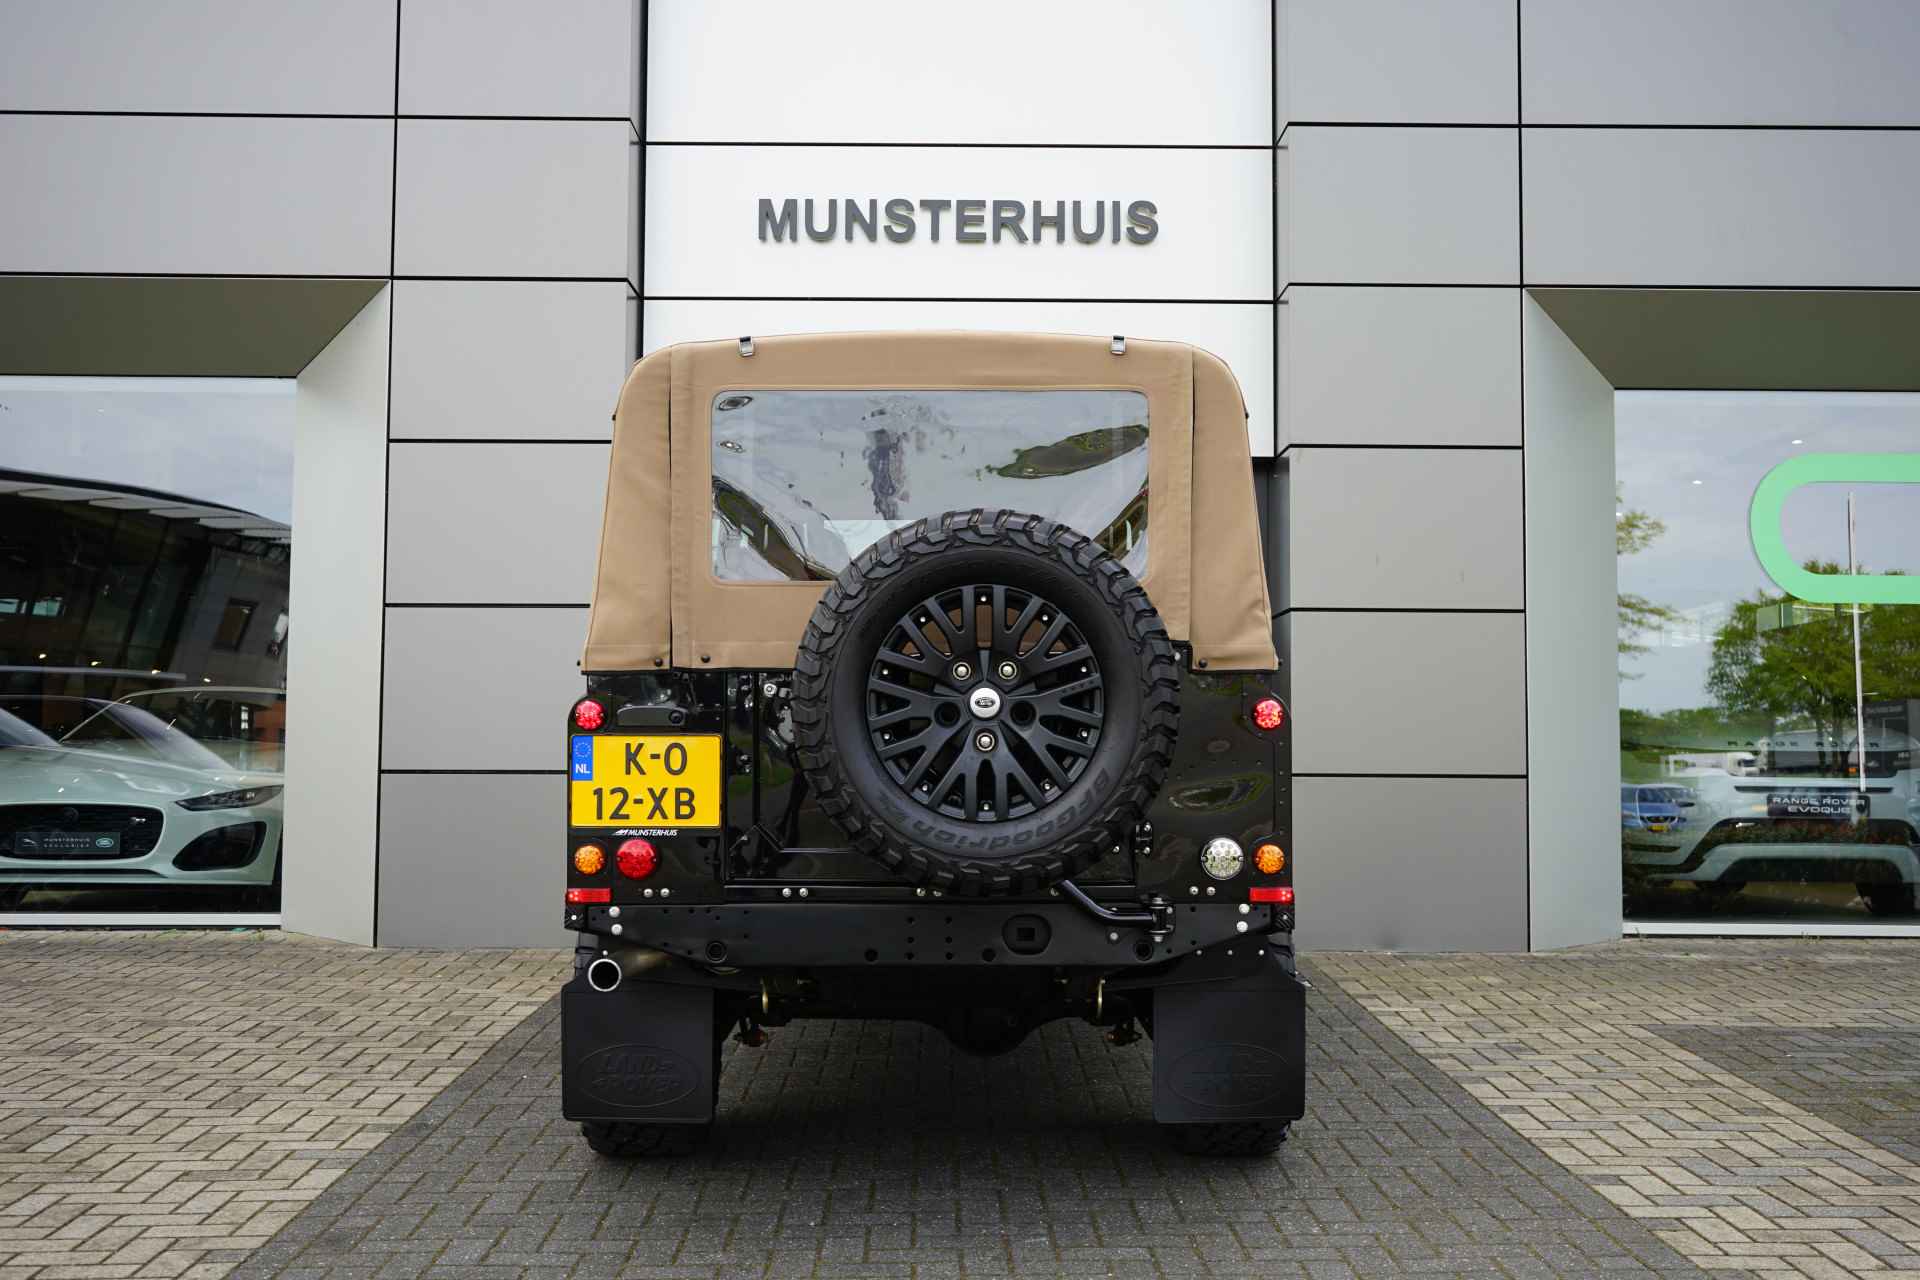 Land Rover Defender 2.4 TD 110 SW Convertible Brand New - River House Rebuild, Butterscotch Leather, BF Goodridge Tyres - 7/26